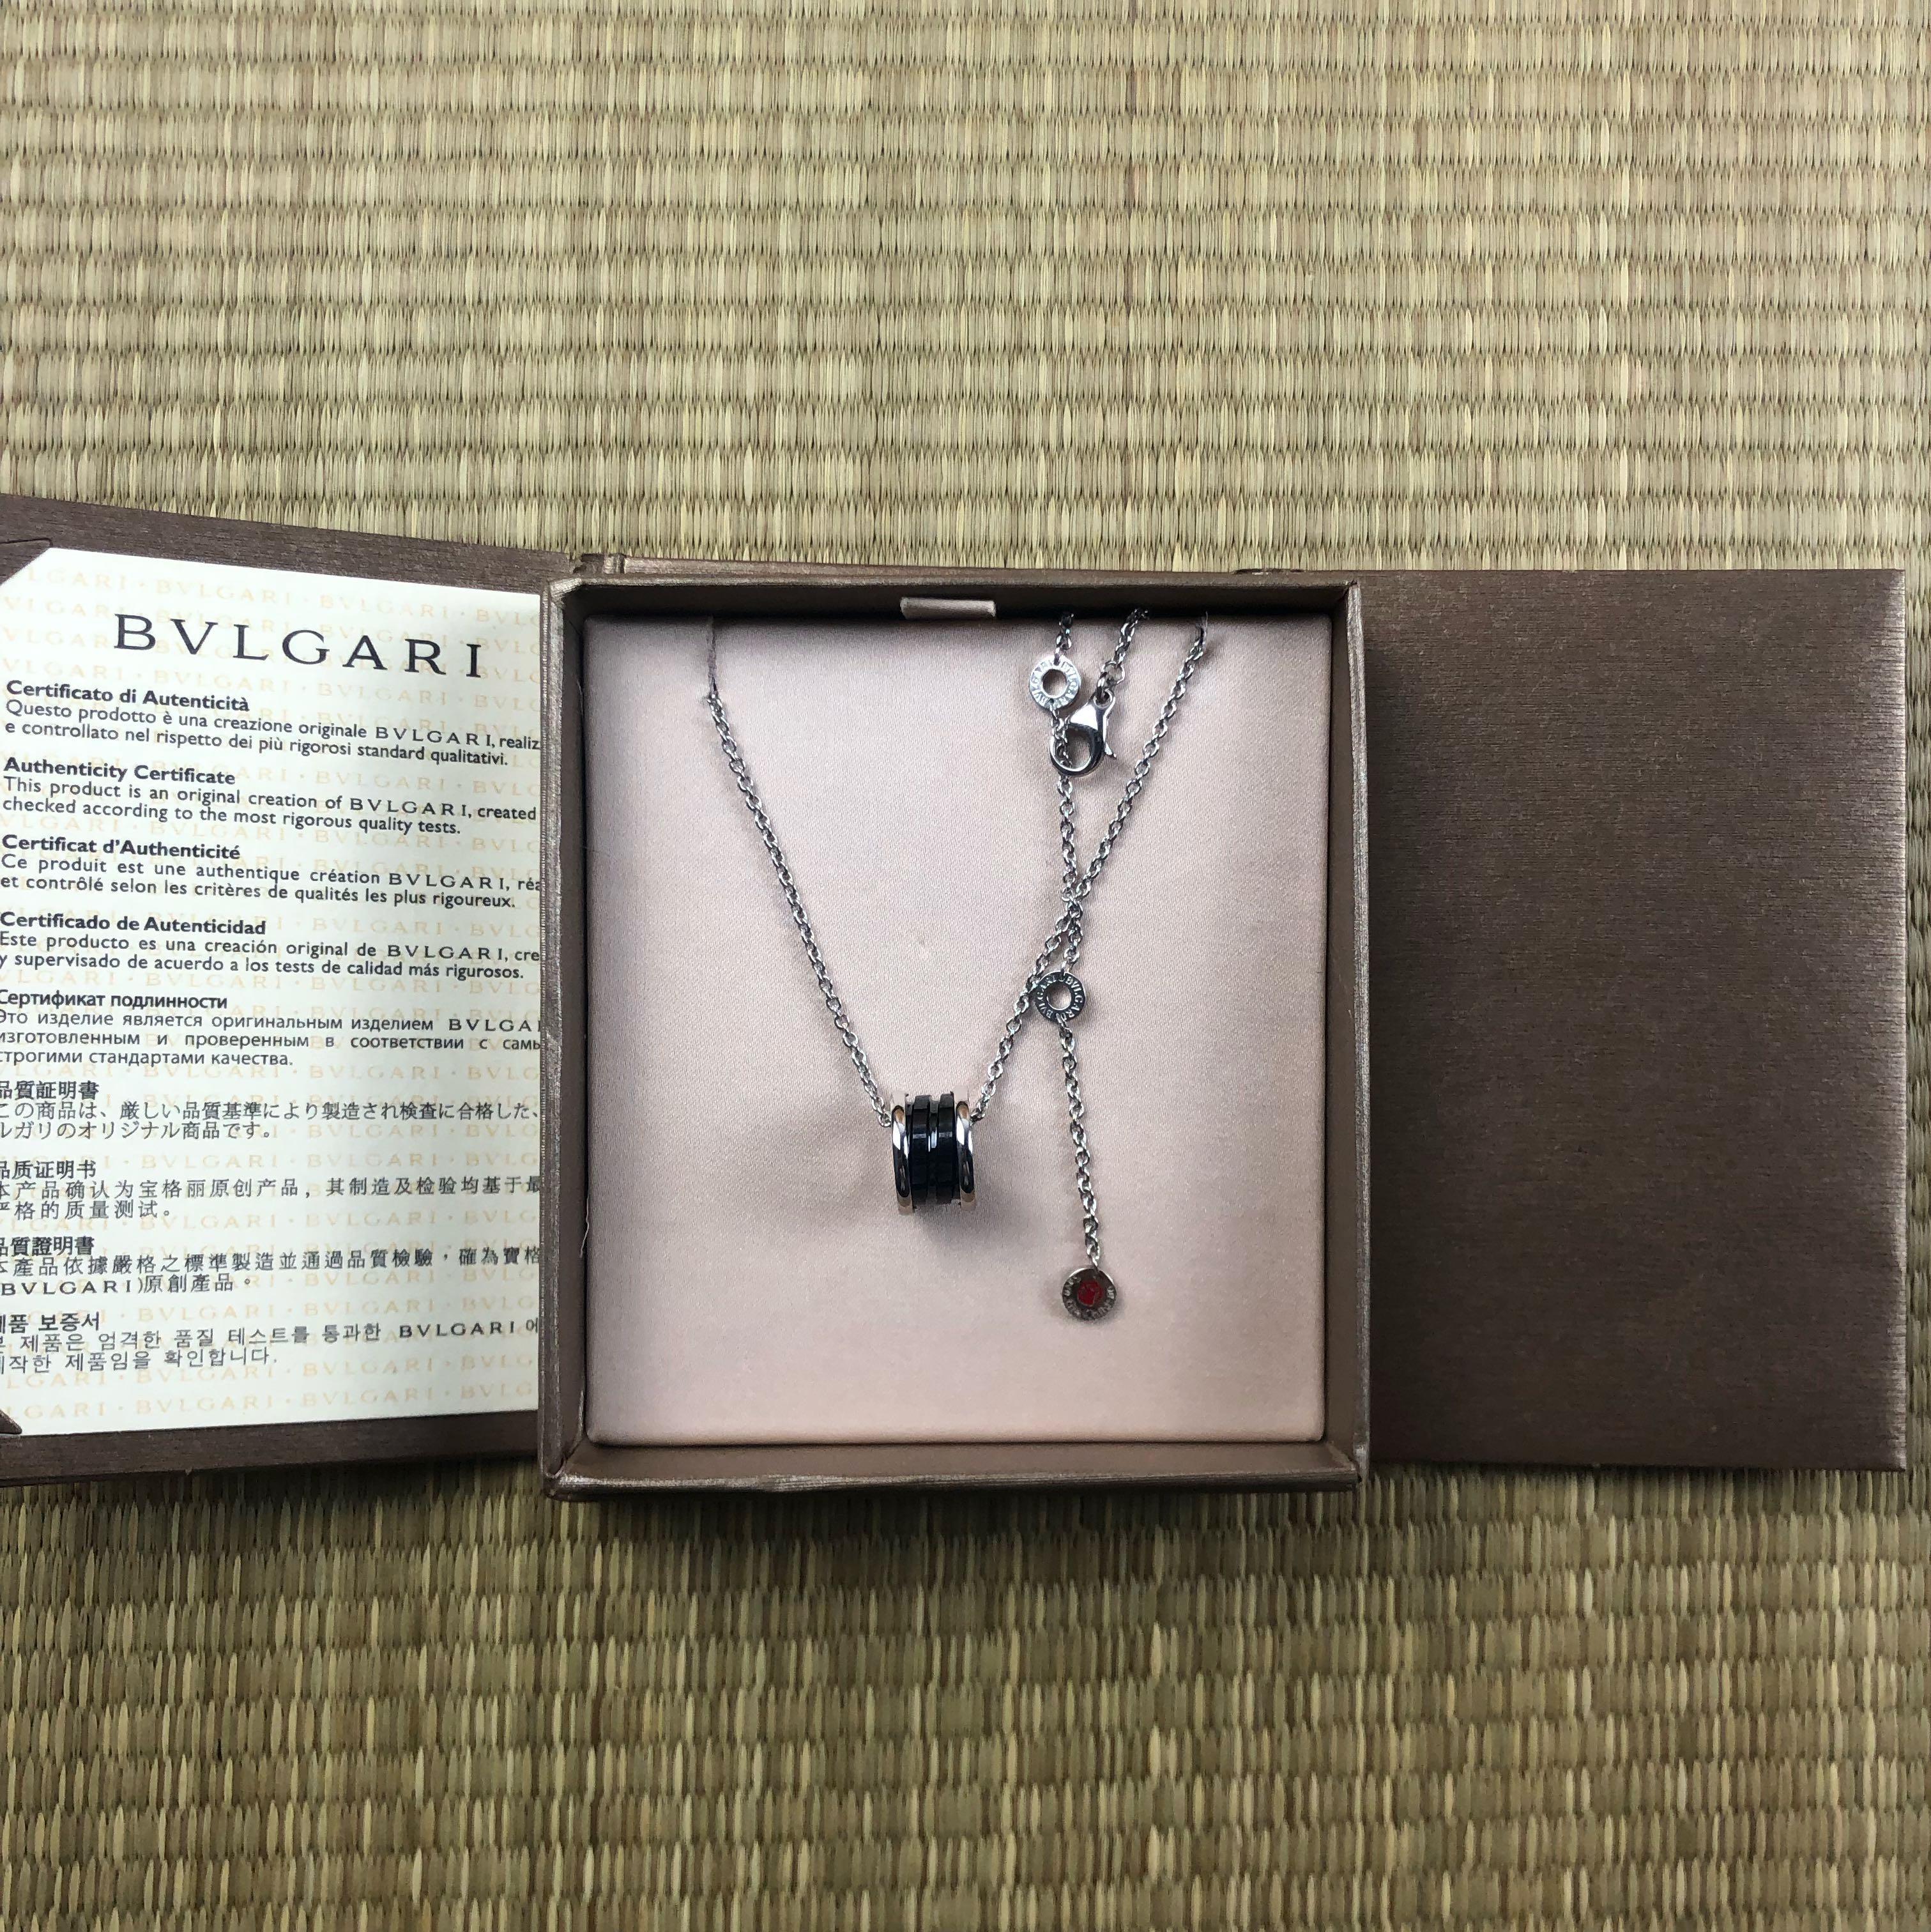 bulgari save the child necklace review